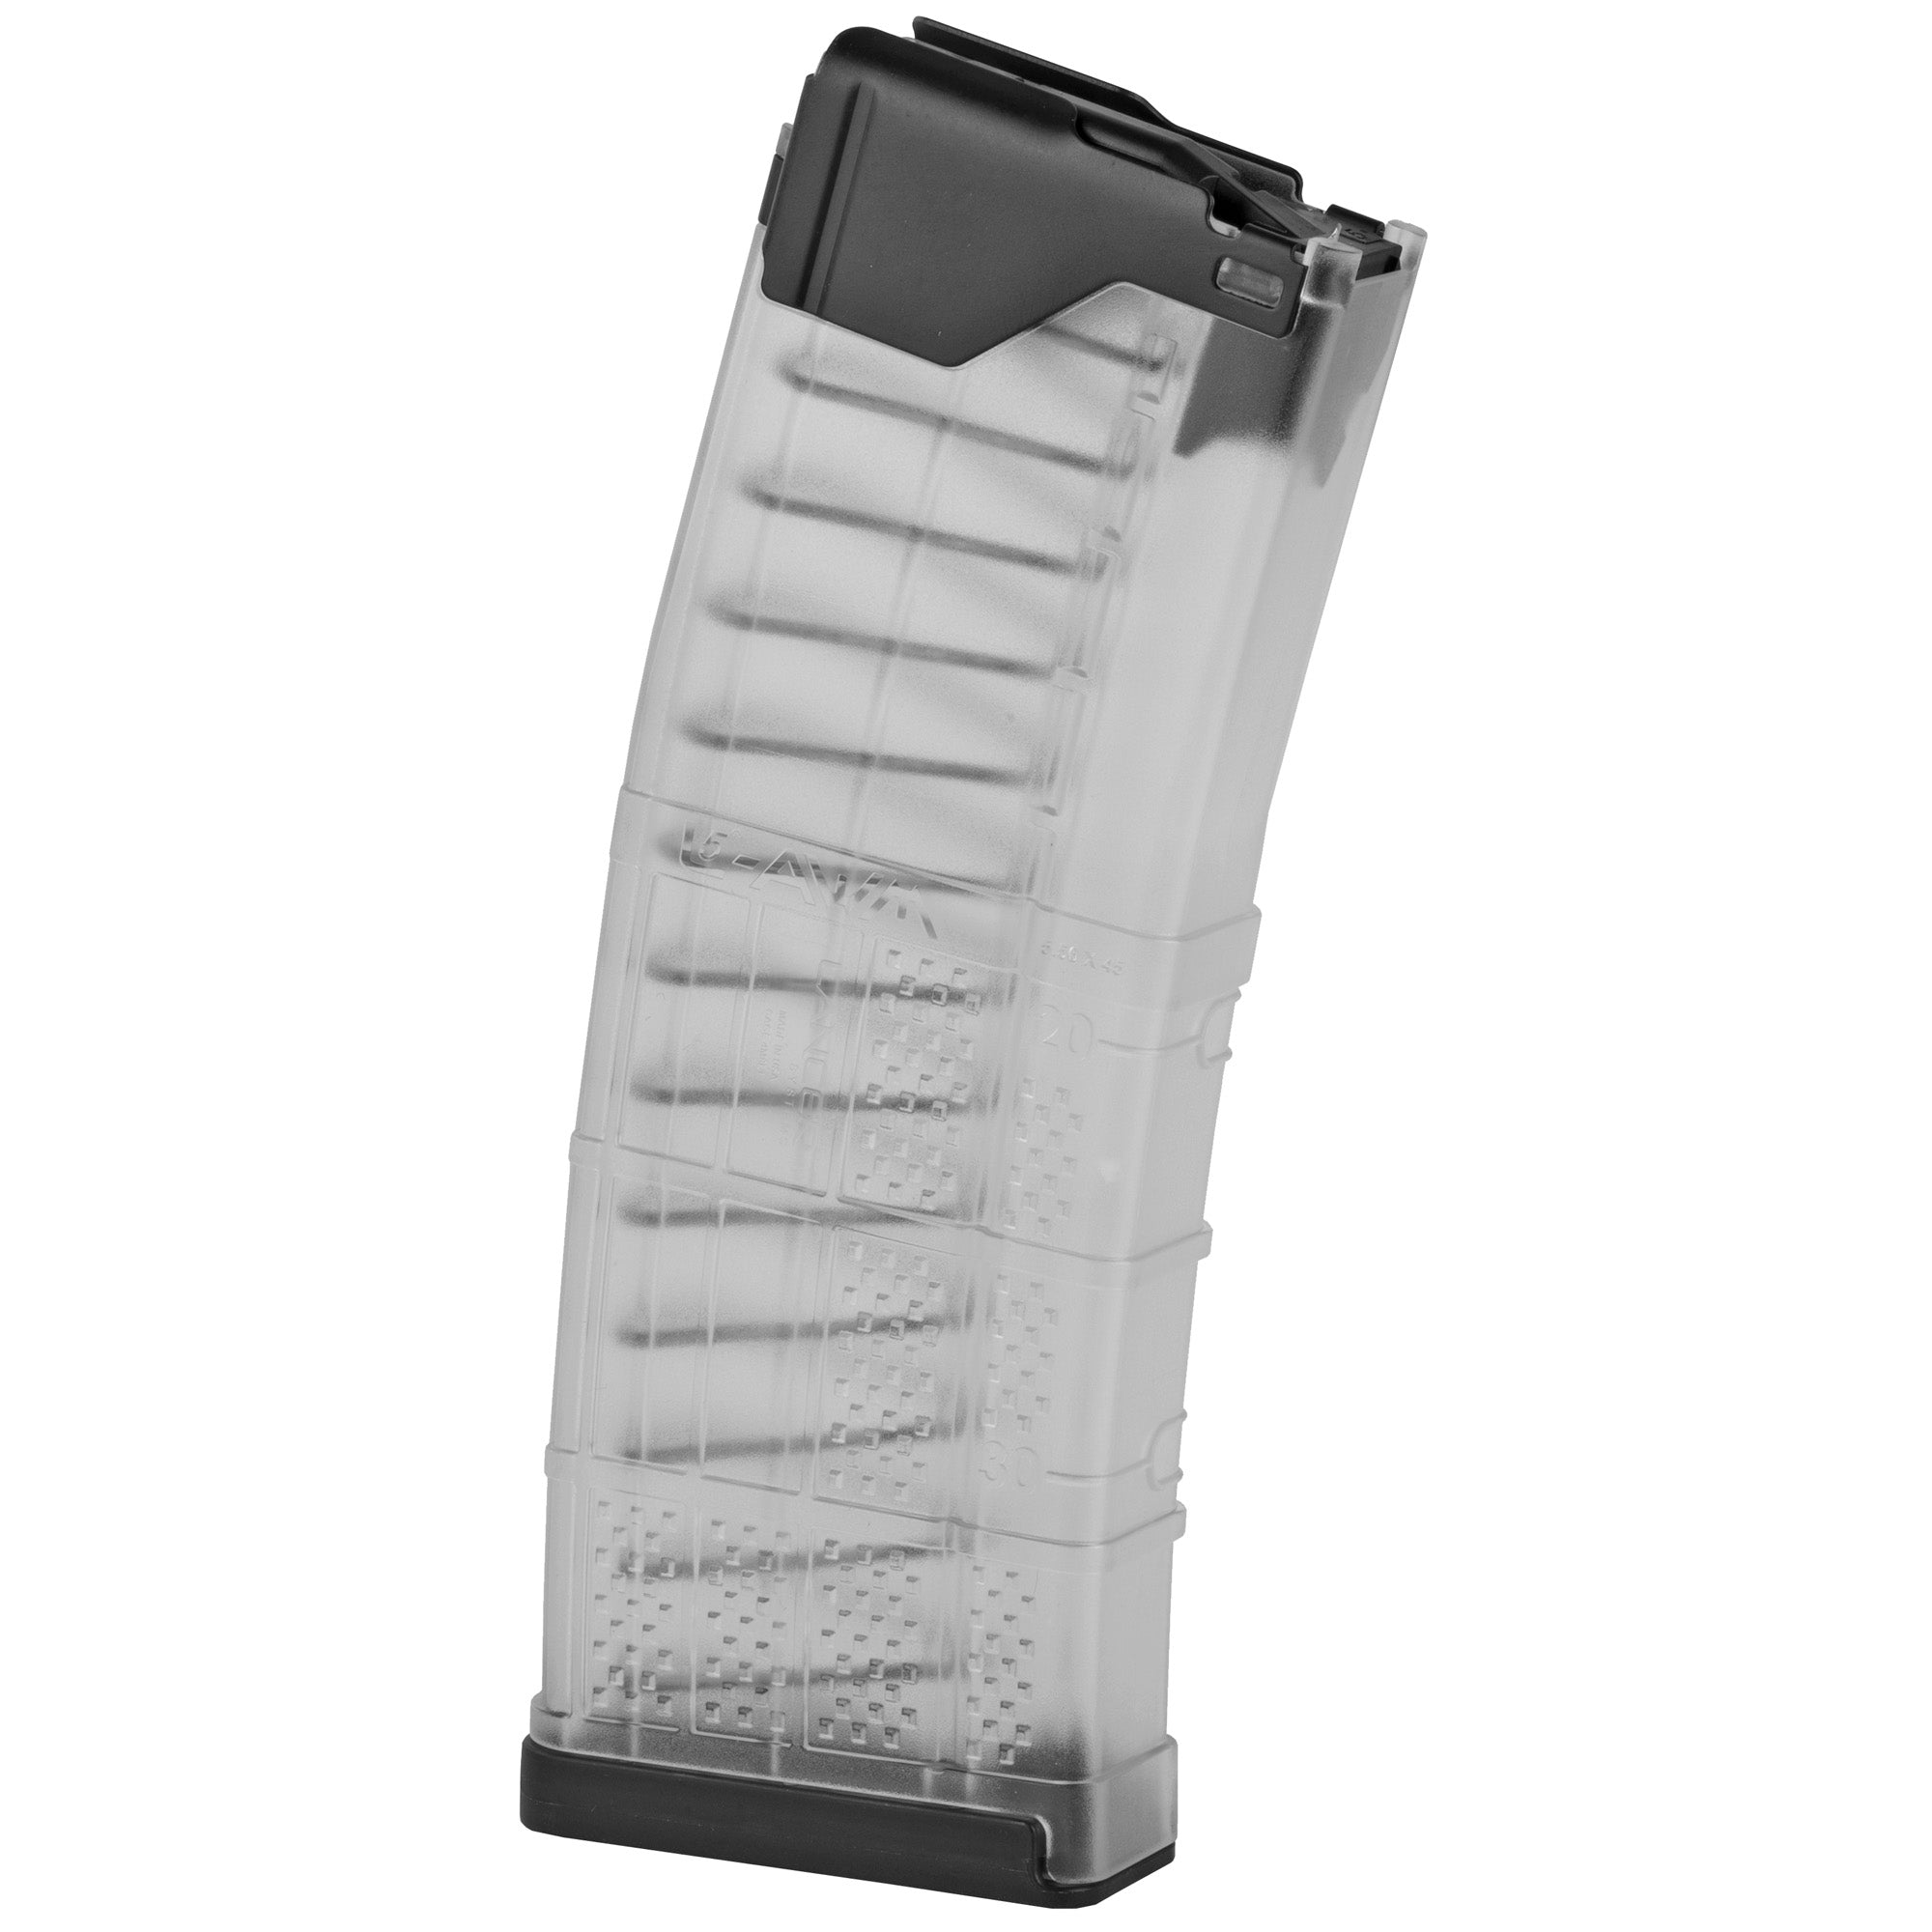 Lancer L5 Advanced Warfighter 30-Round Magazine in Translucent Clear, optimized for 223/5.56 AR Rifles.